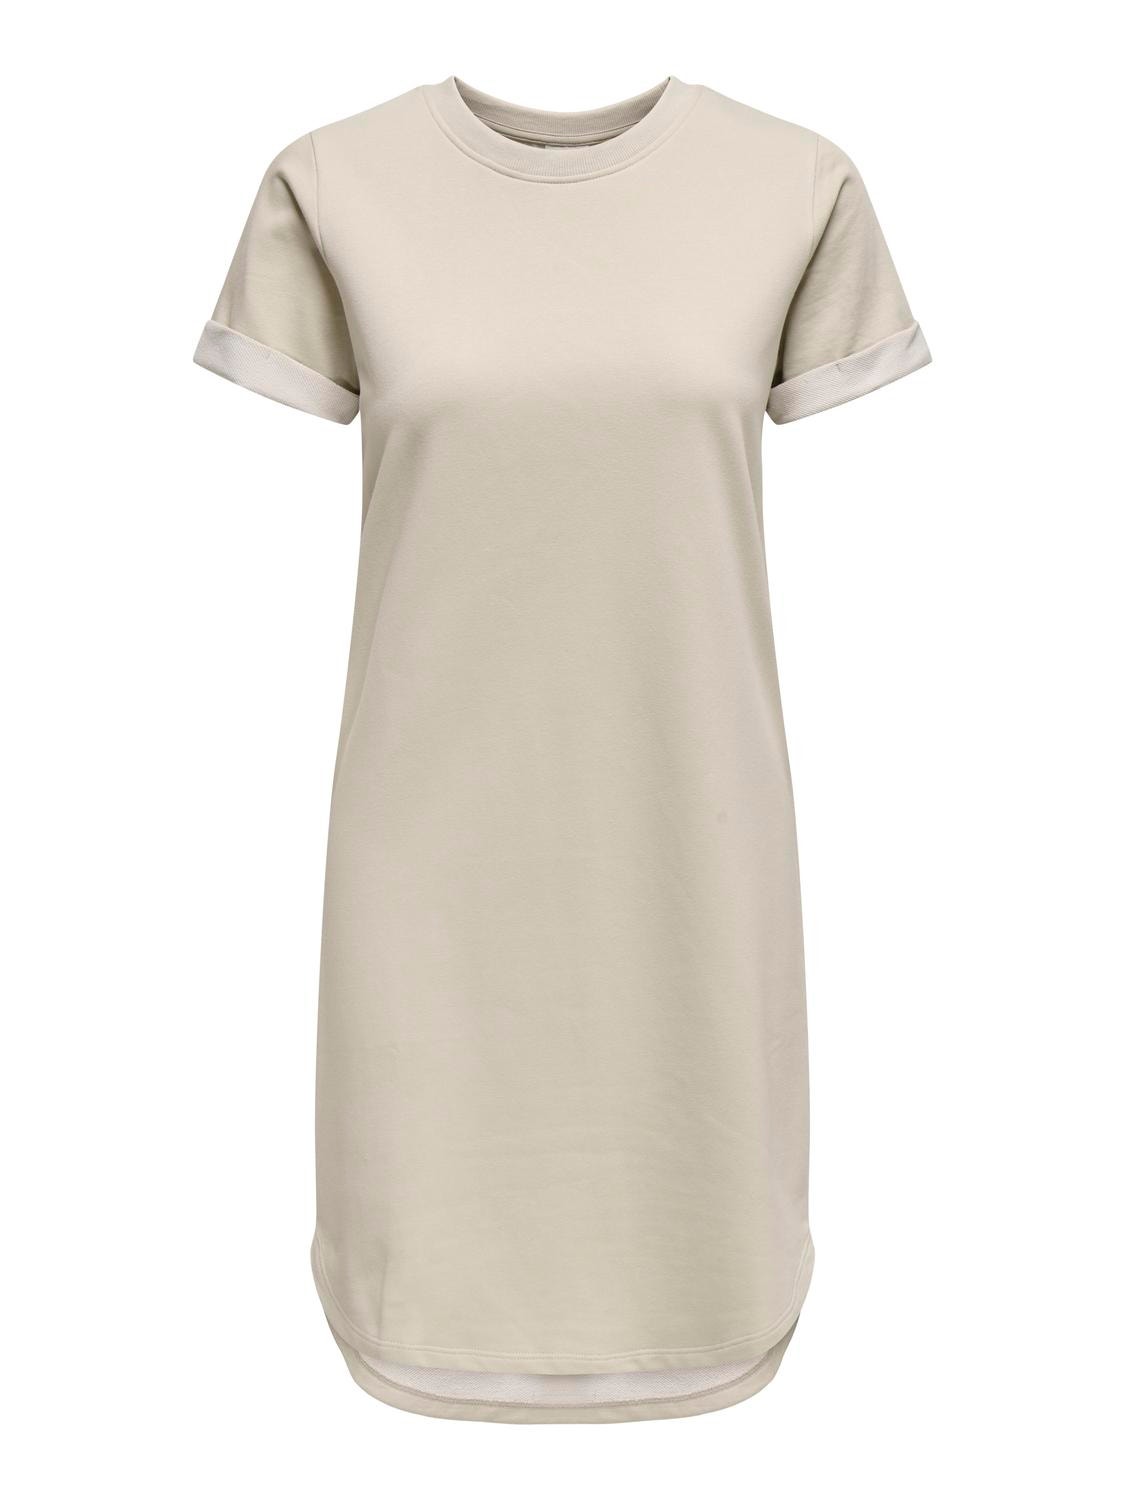 ONLY Short T-shirt Dress -Chateau Gray - 15174793